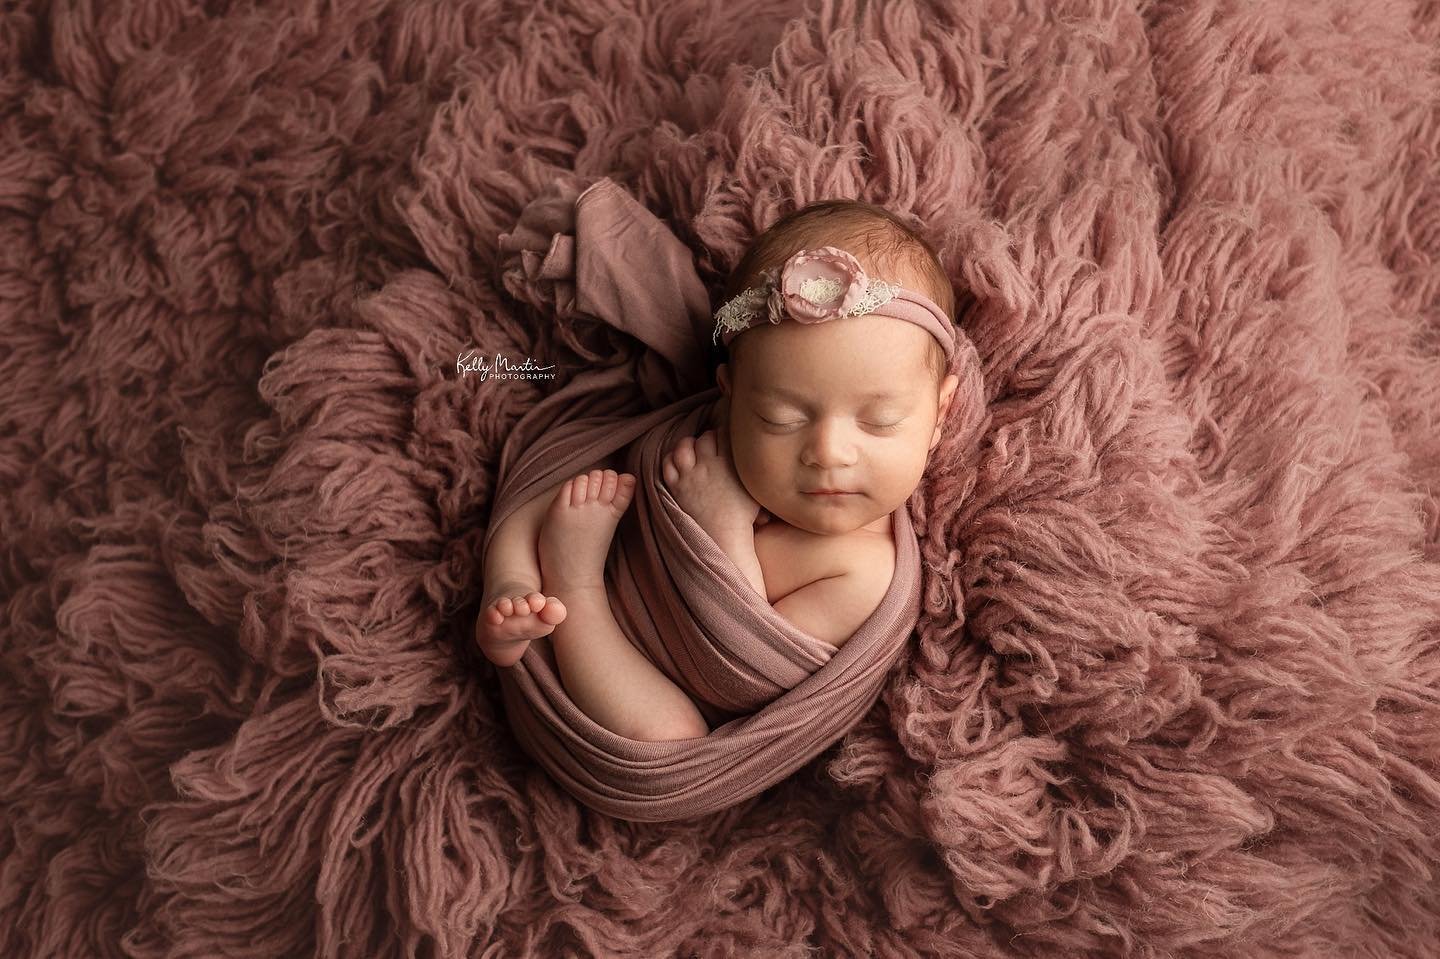 Looking good in pink.  This babe wanted out 8 weeks early and spent some time in the NICU.  But she ate like a boss to gain weight and break out.  Her due date was 2 days ago and she&rsquo;s thriving 💗 #kellymartinphotography #indianapolisnewbornpho